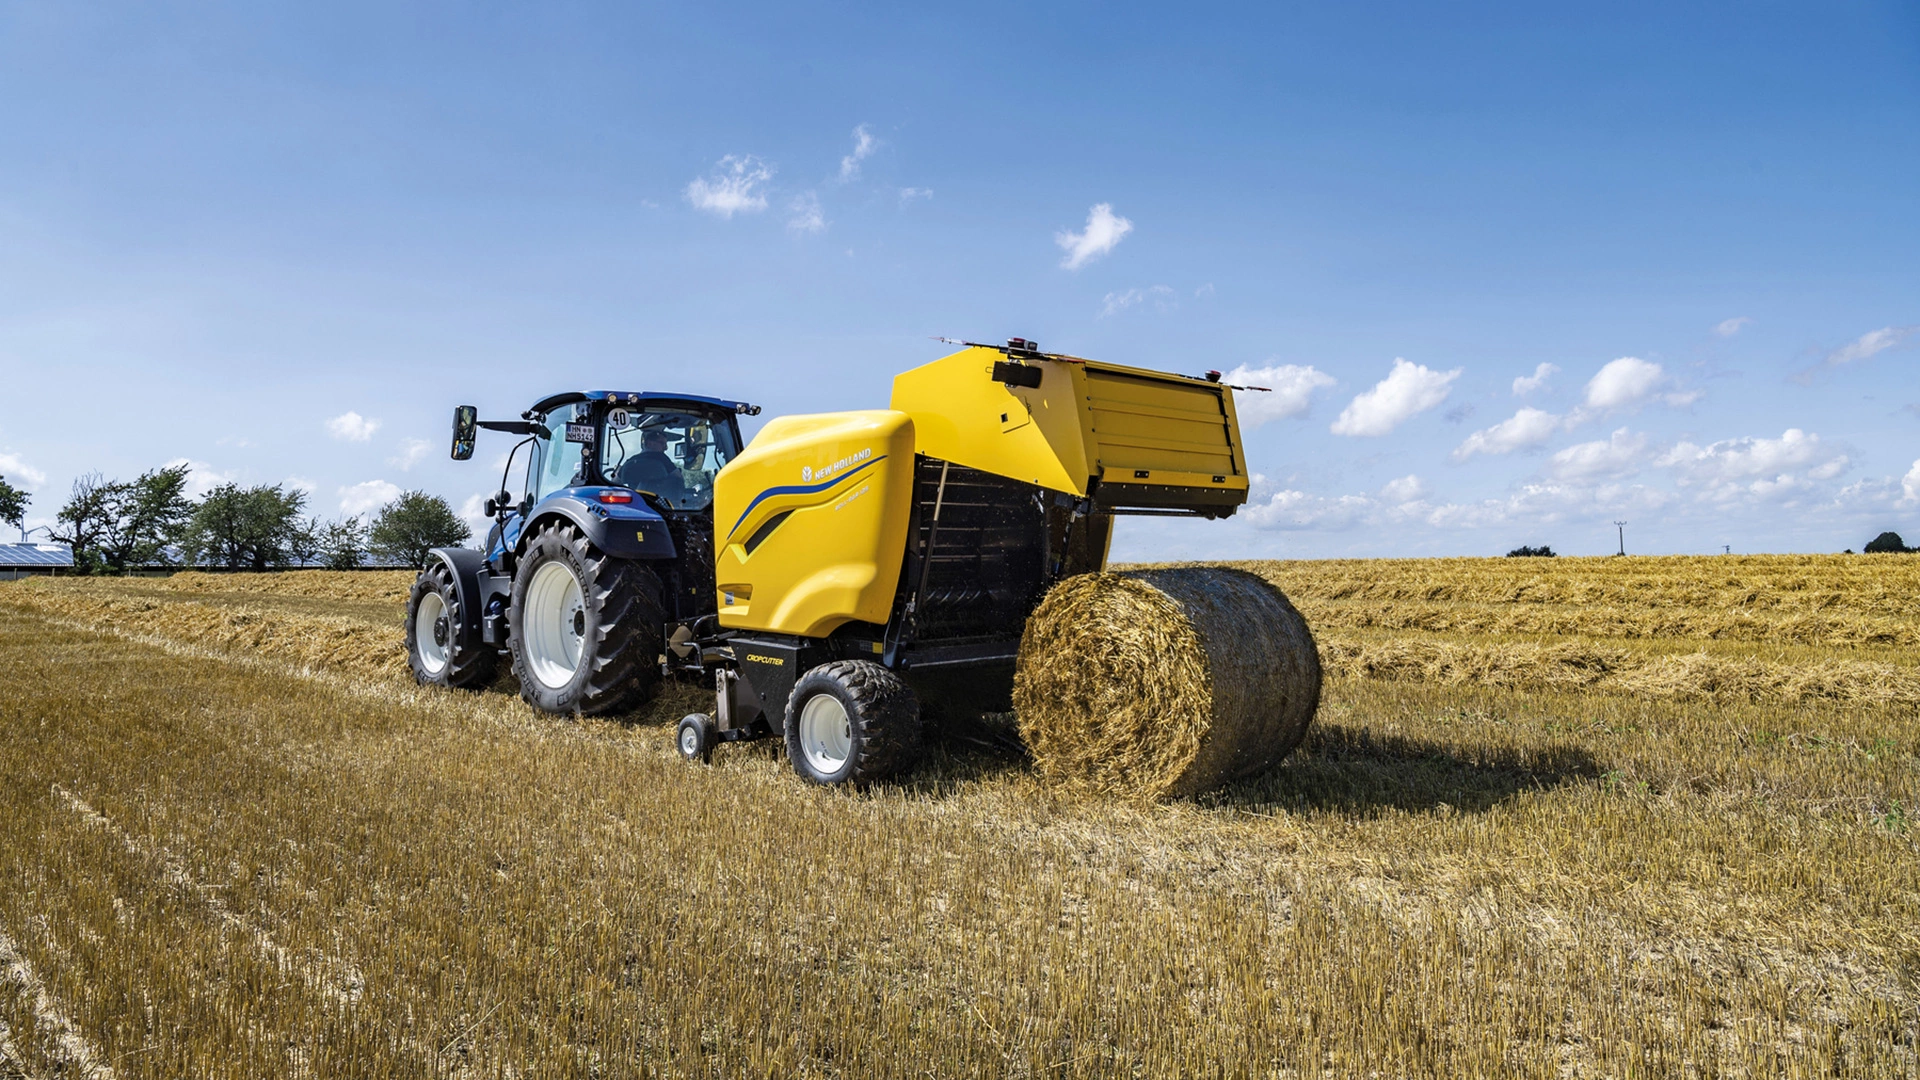 New Holland tractor operating a Roll Baler 125 producing round bale in a field.